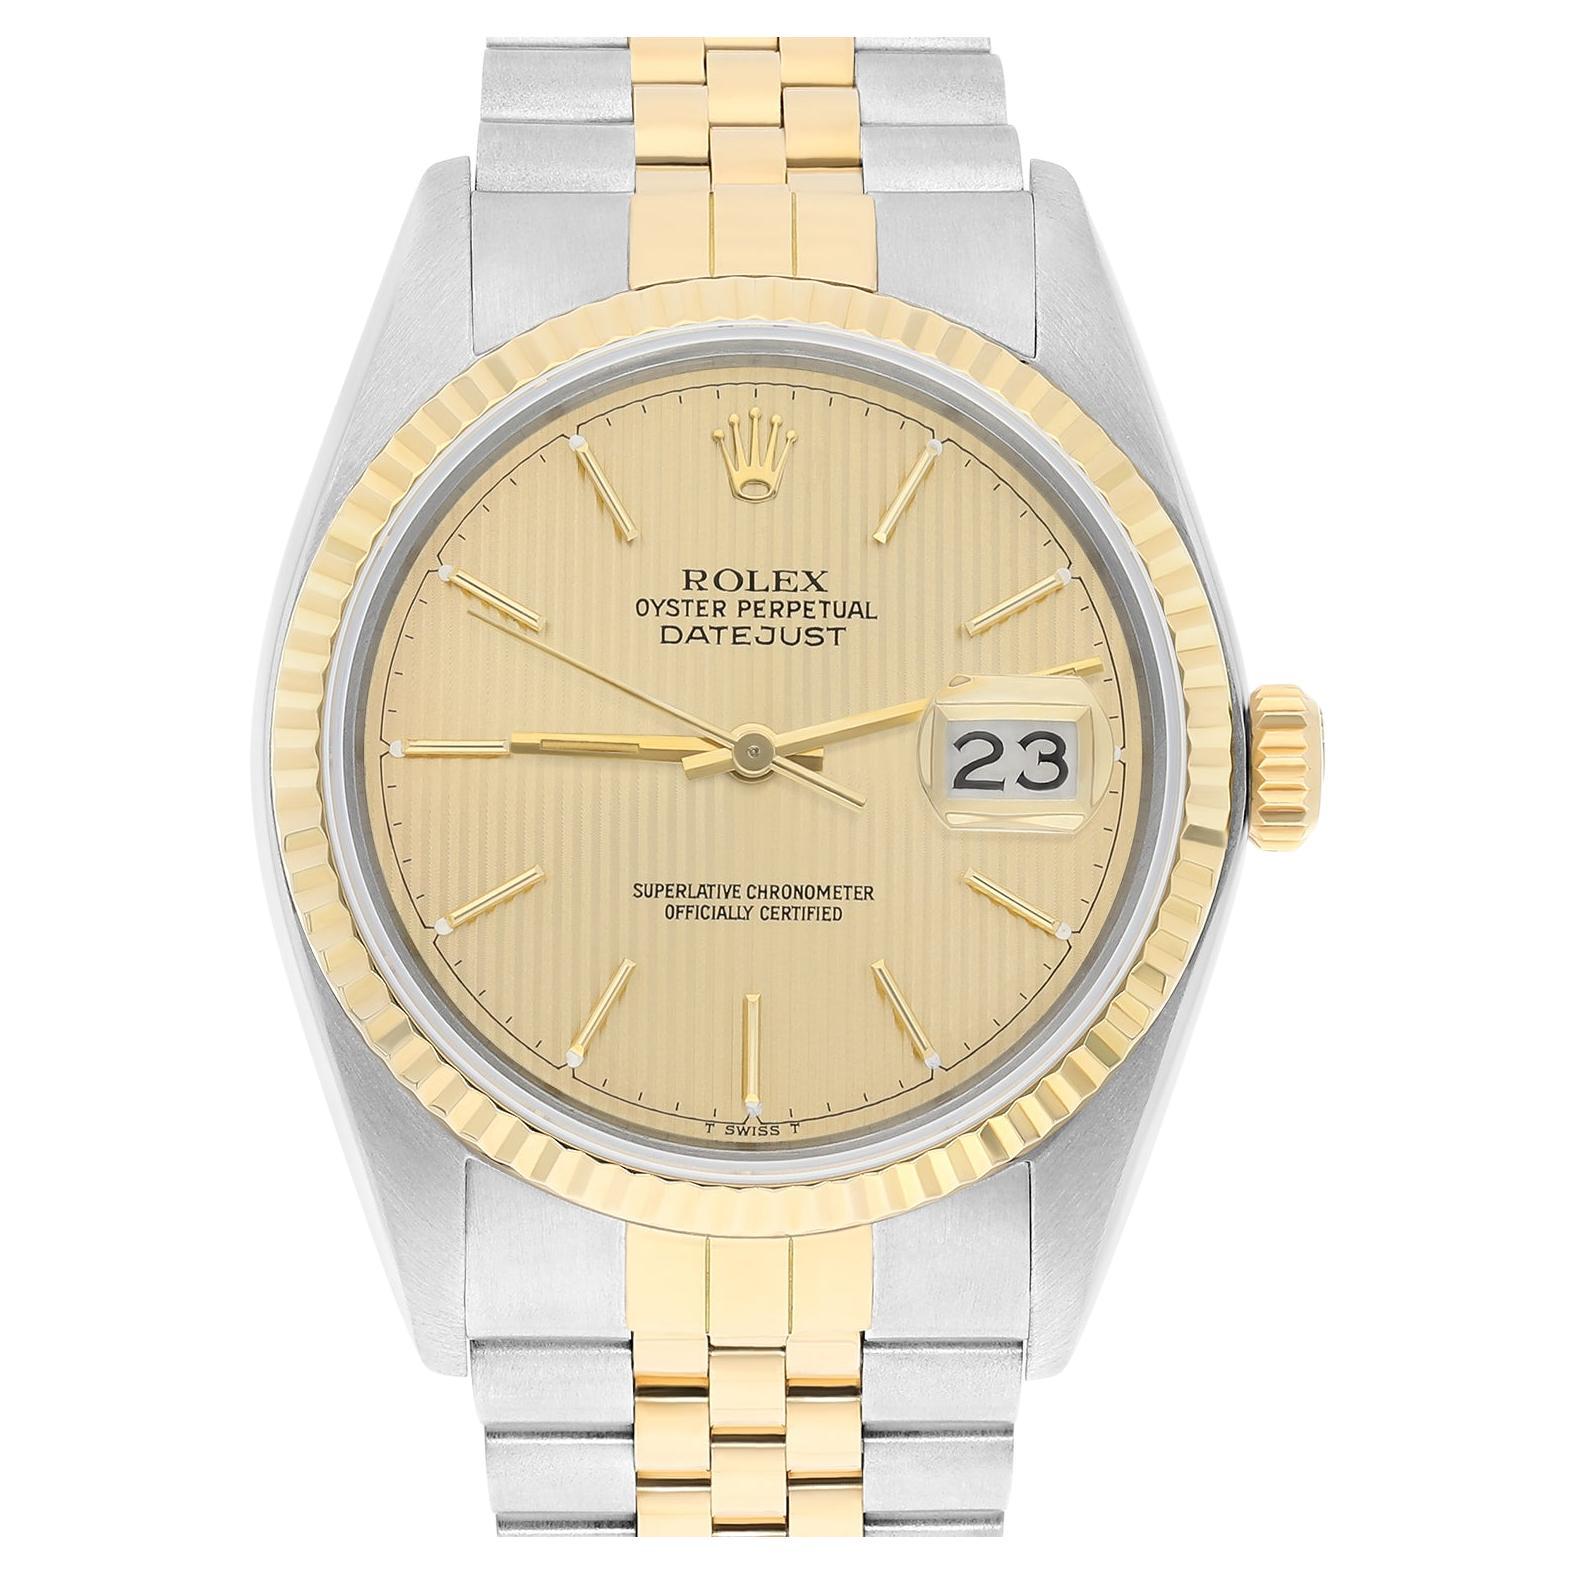 Rolex Datejust 36mm Two Tone Champagne Dial Jubilee 16013 Circa 1988 Papers en vente